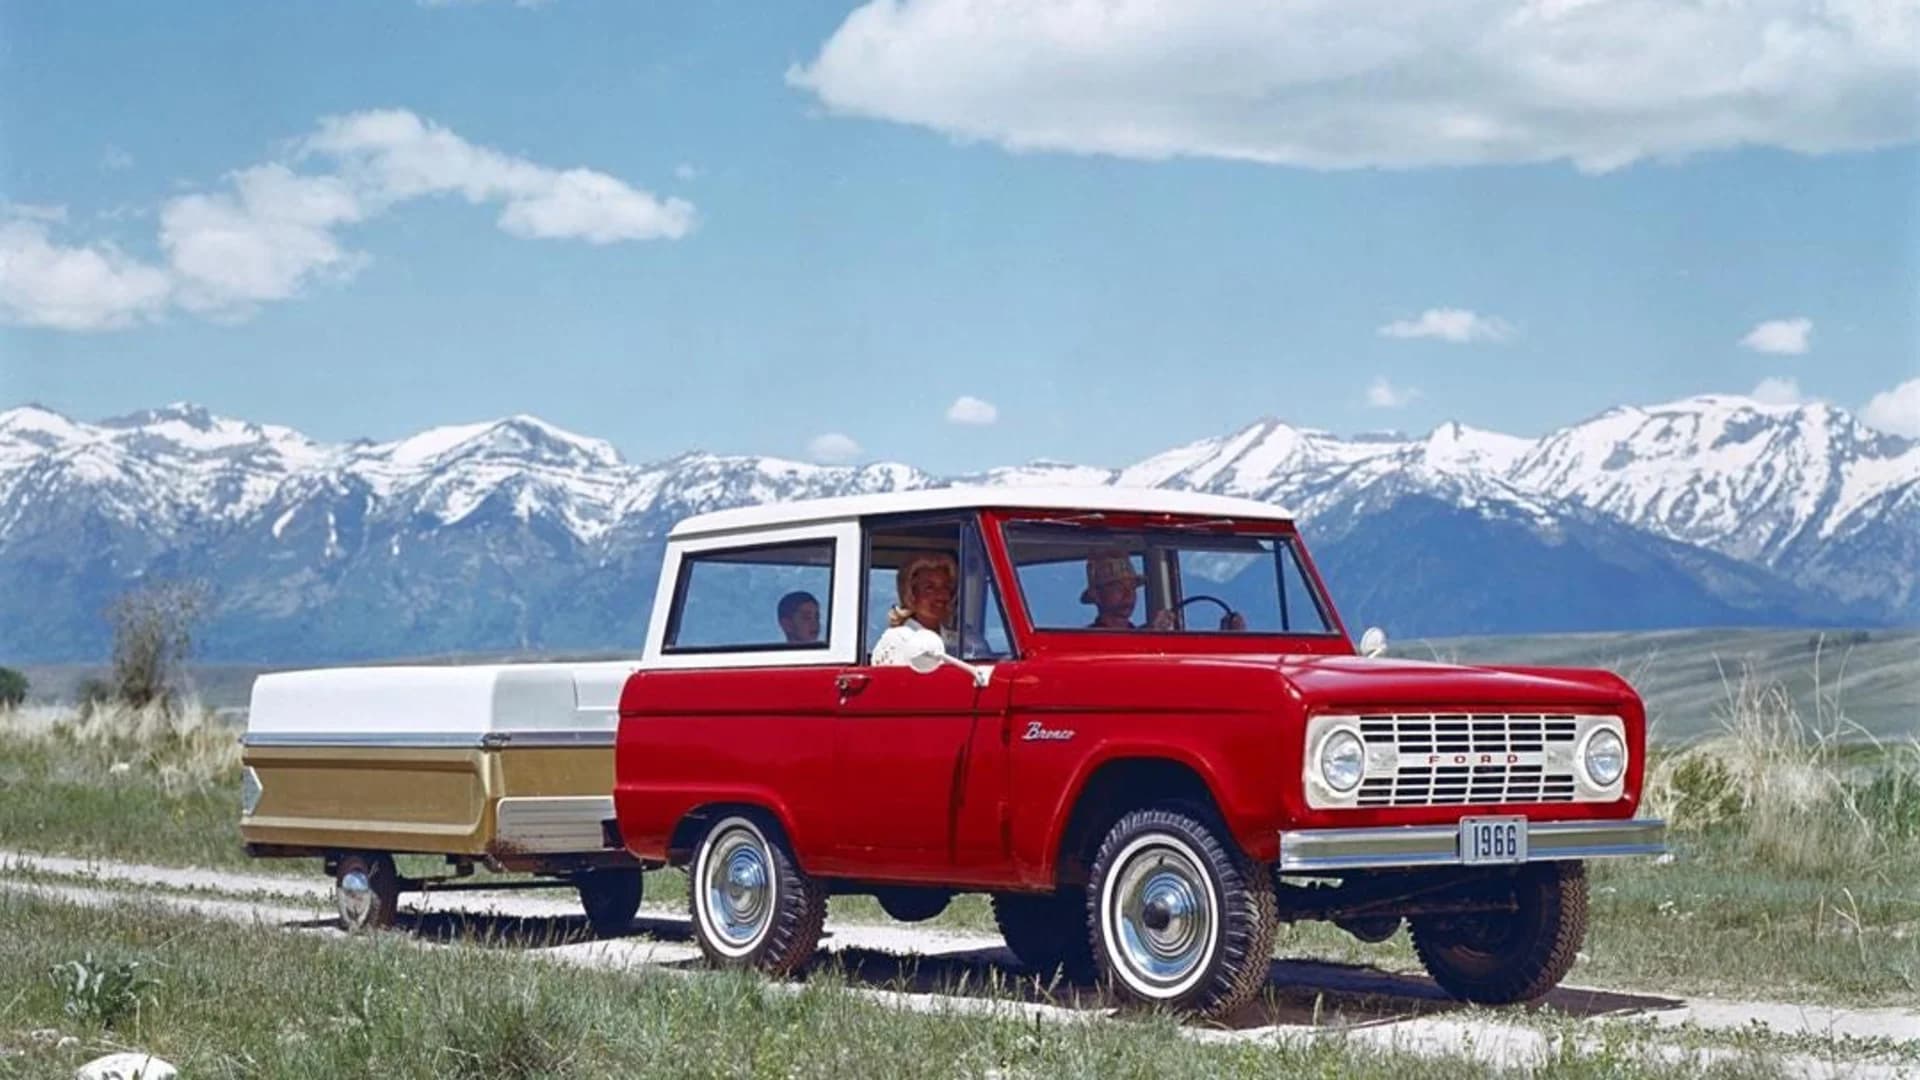 Ford reviving Bronco brand, will introduce 2 new vehicles this month